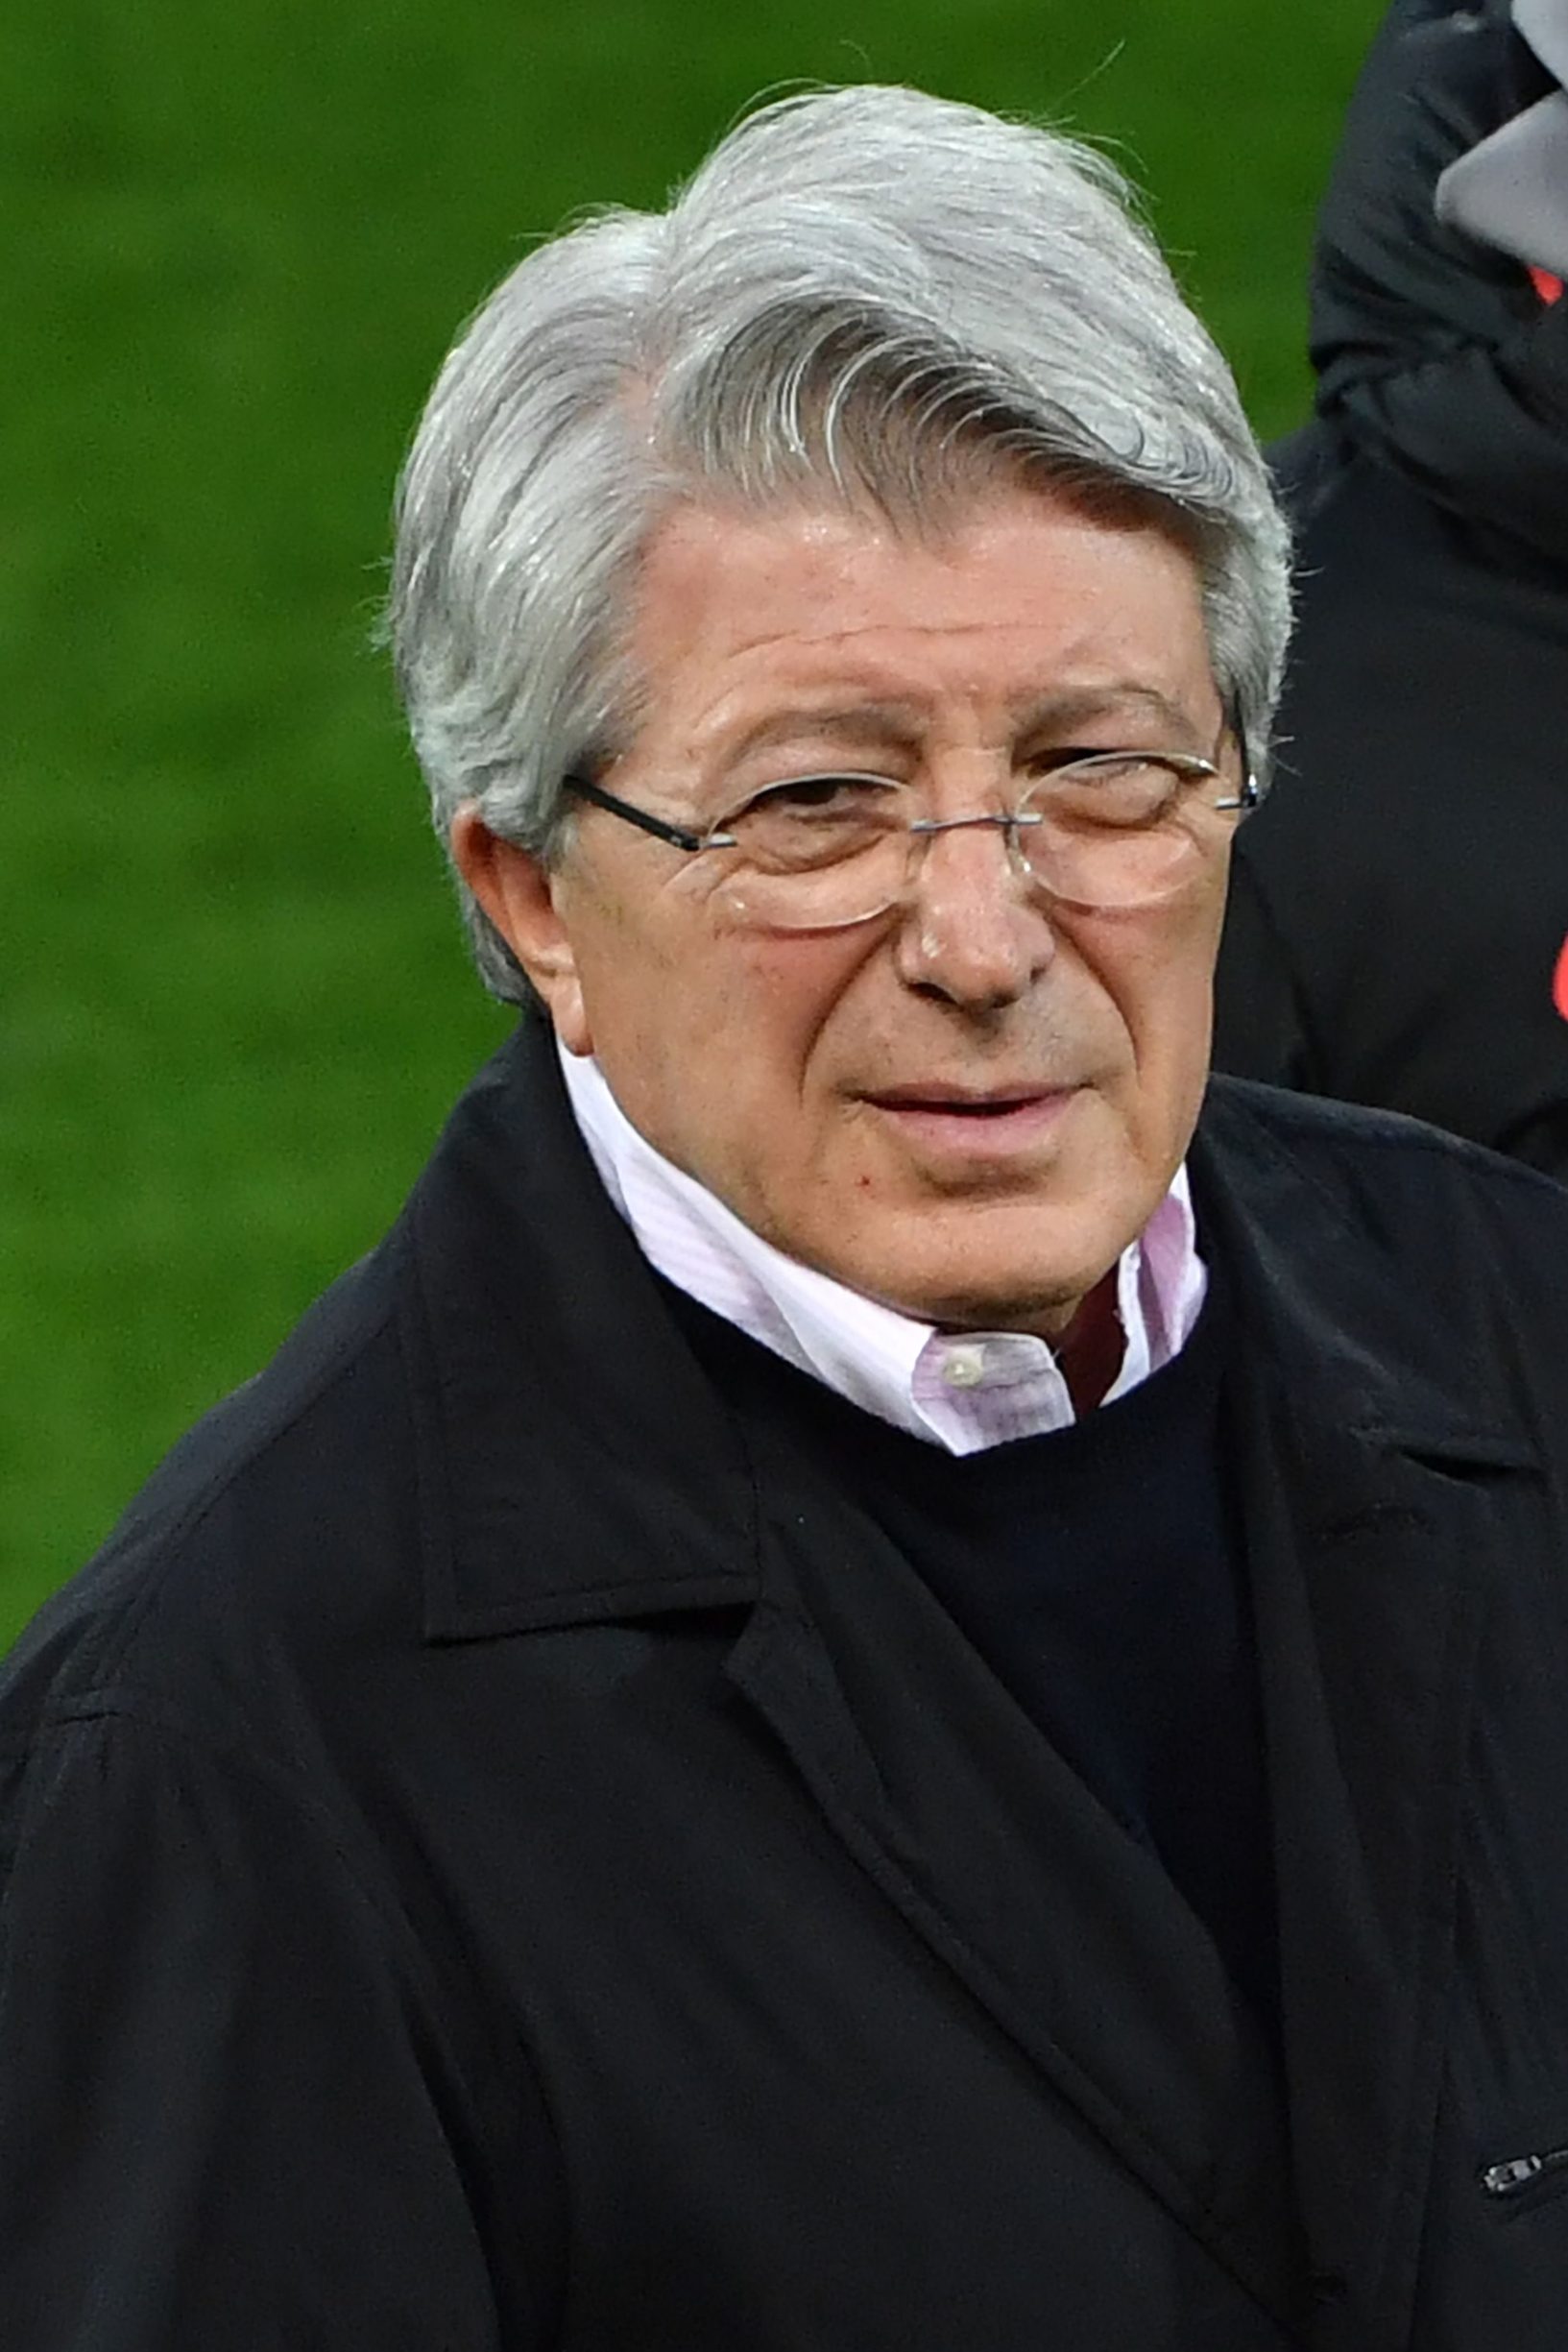 Atletico Madrid president Enrique Cerezo attends a training session at Anfield stadium in Liverpool, north west England on March 10, 2020, on the eve of their UEFA Champions League last 16 second leg football match against Liverpool. (Photo by Paul ELLIS / AFP)